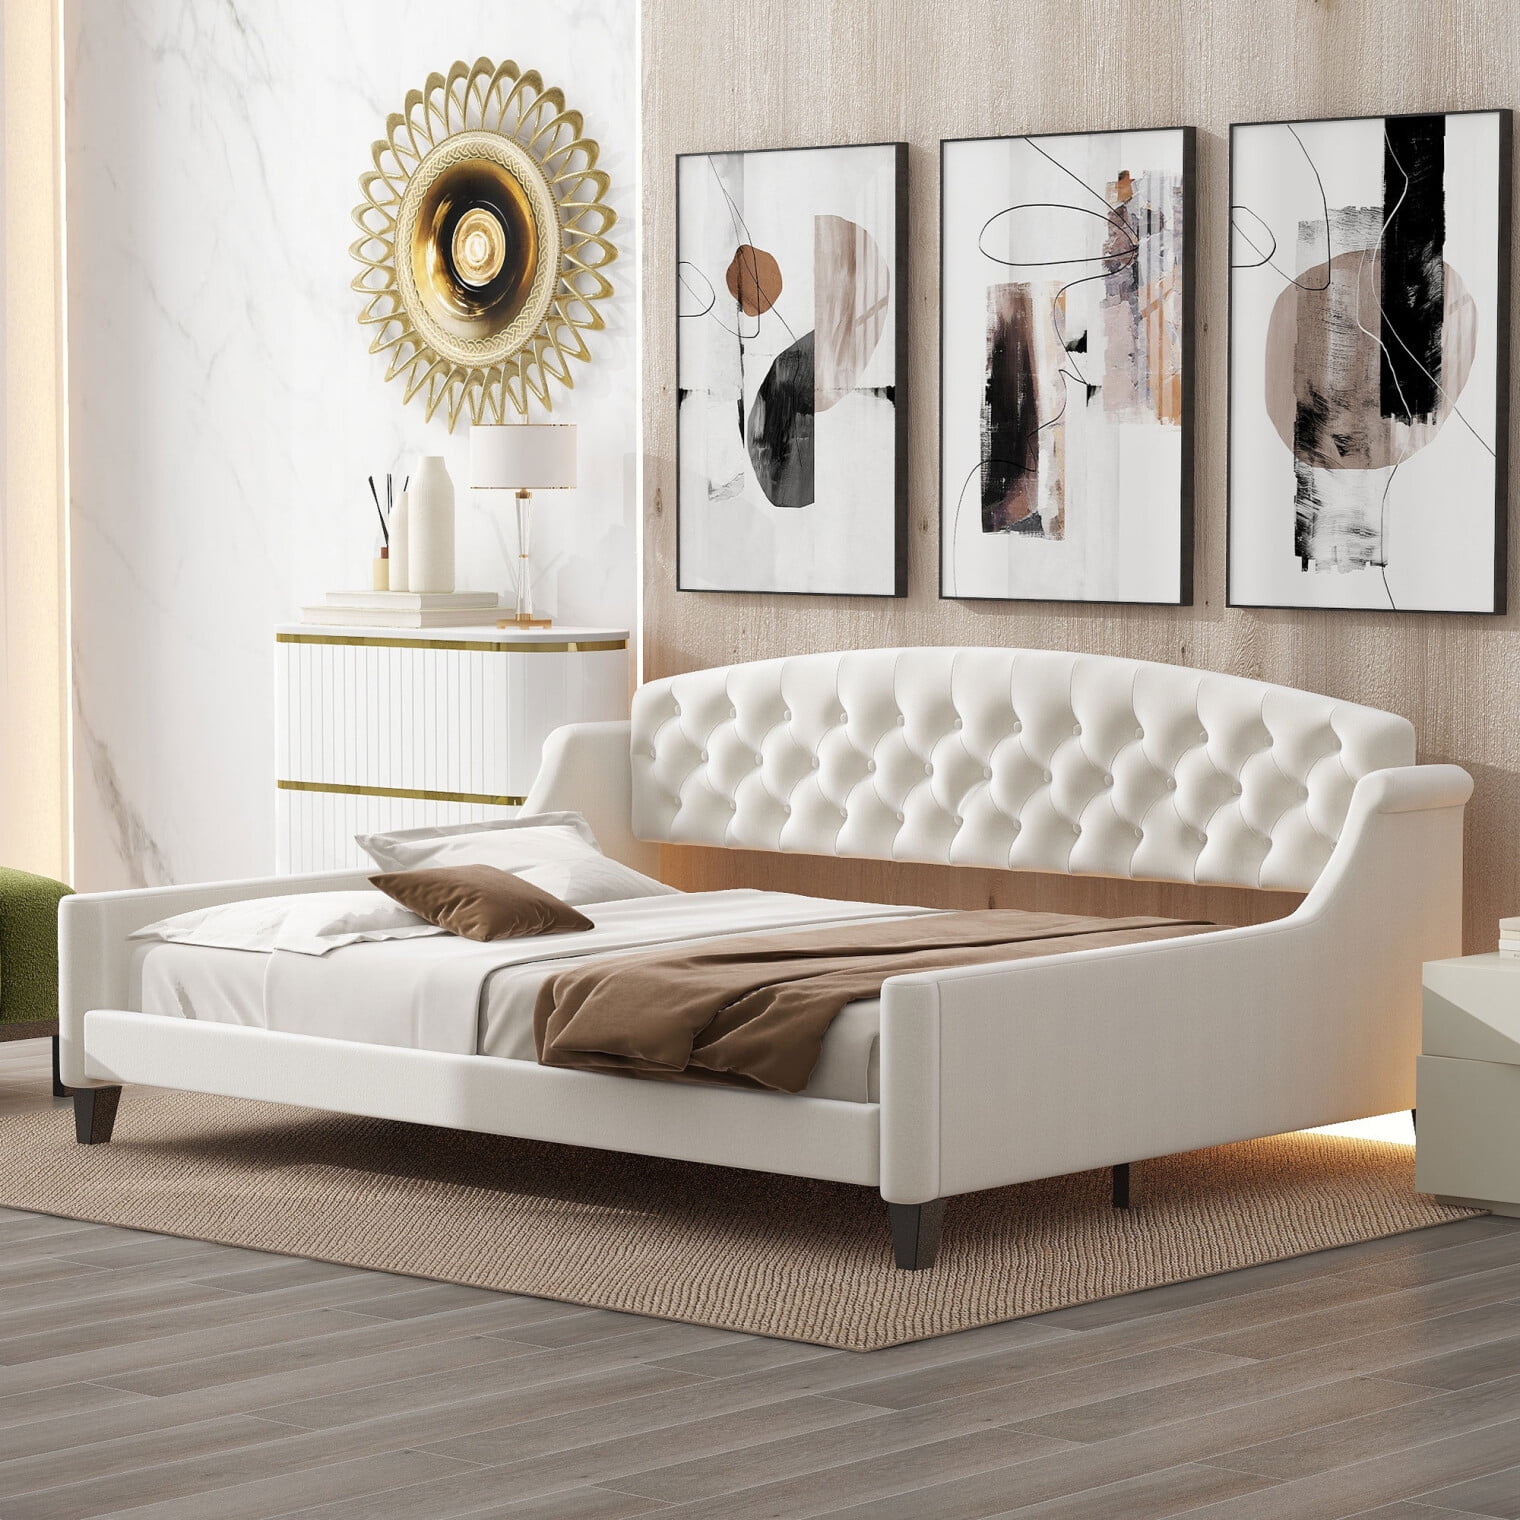 Full Size Daybed, Modern Luxury Tufted Button Upholstered Daybed Sofa ...